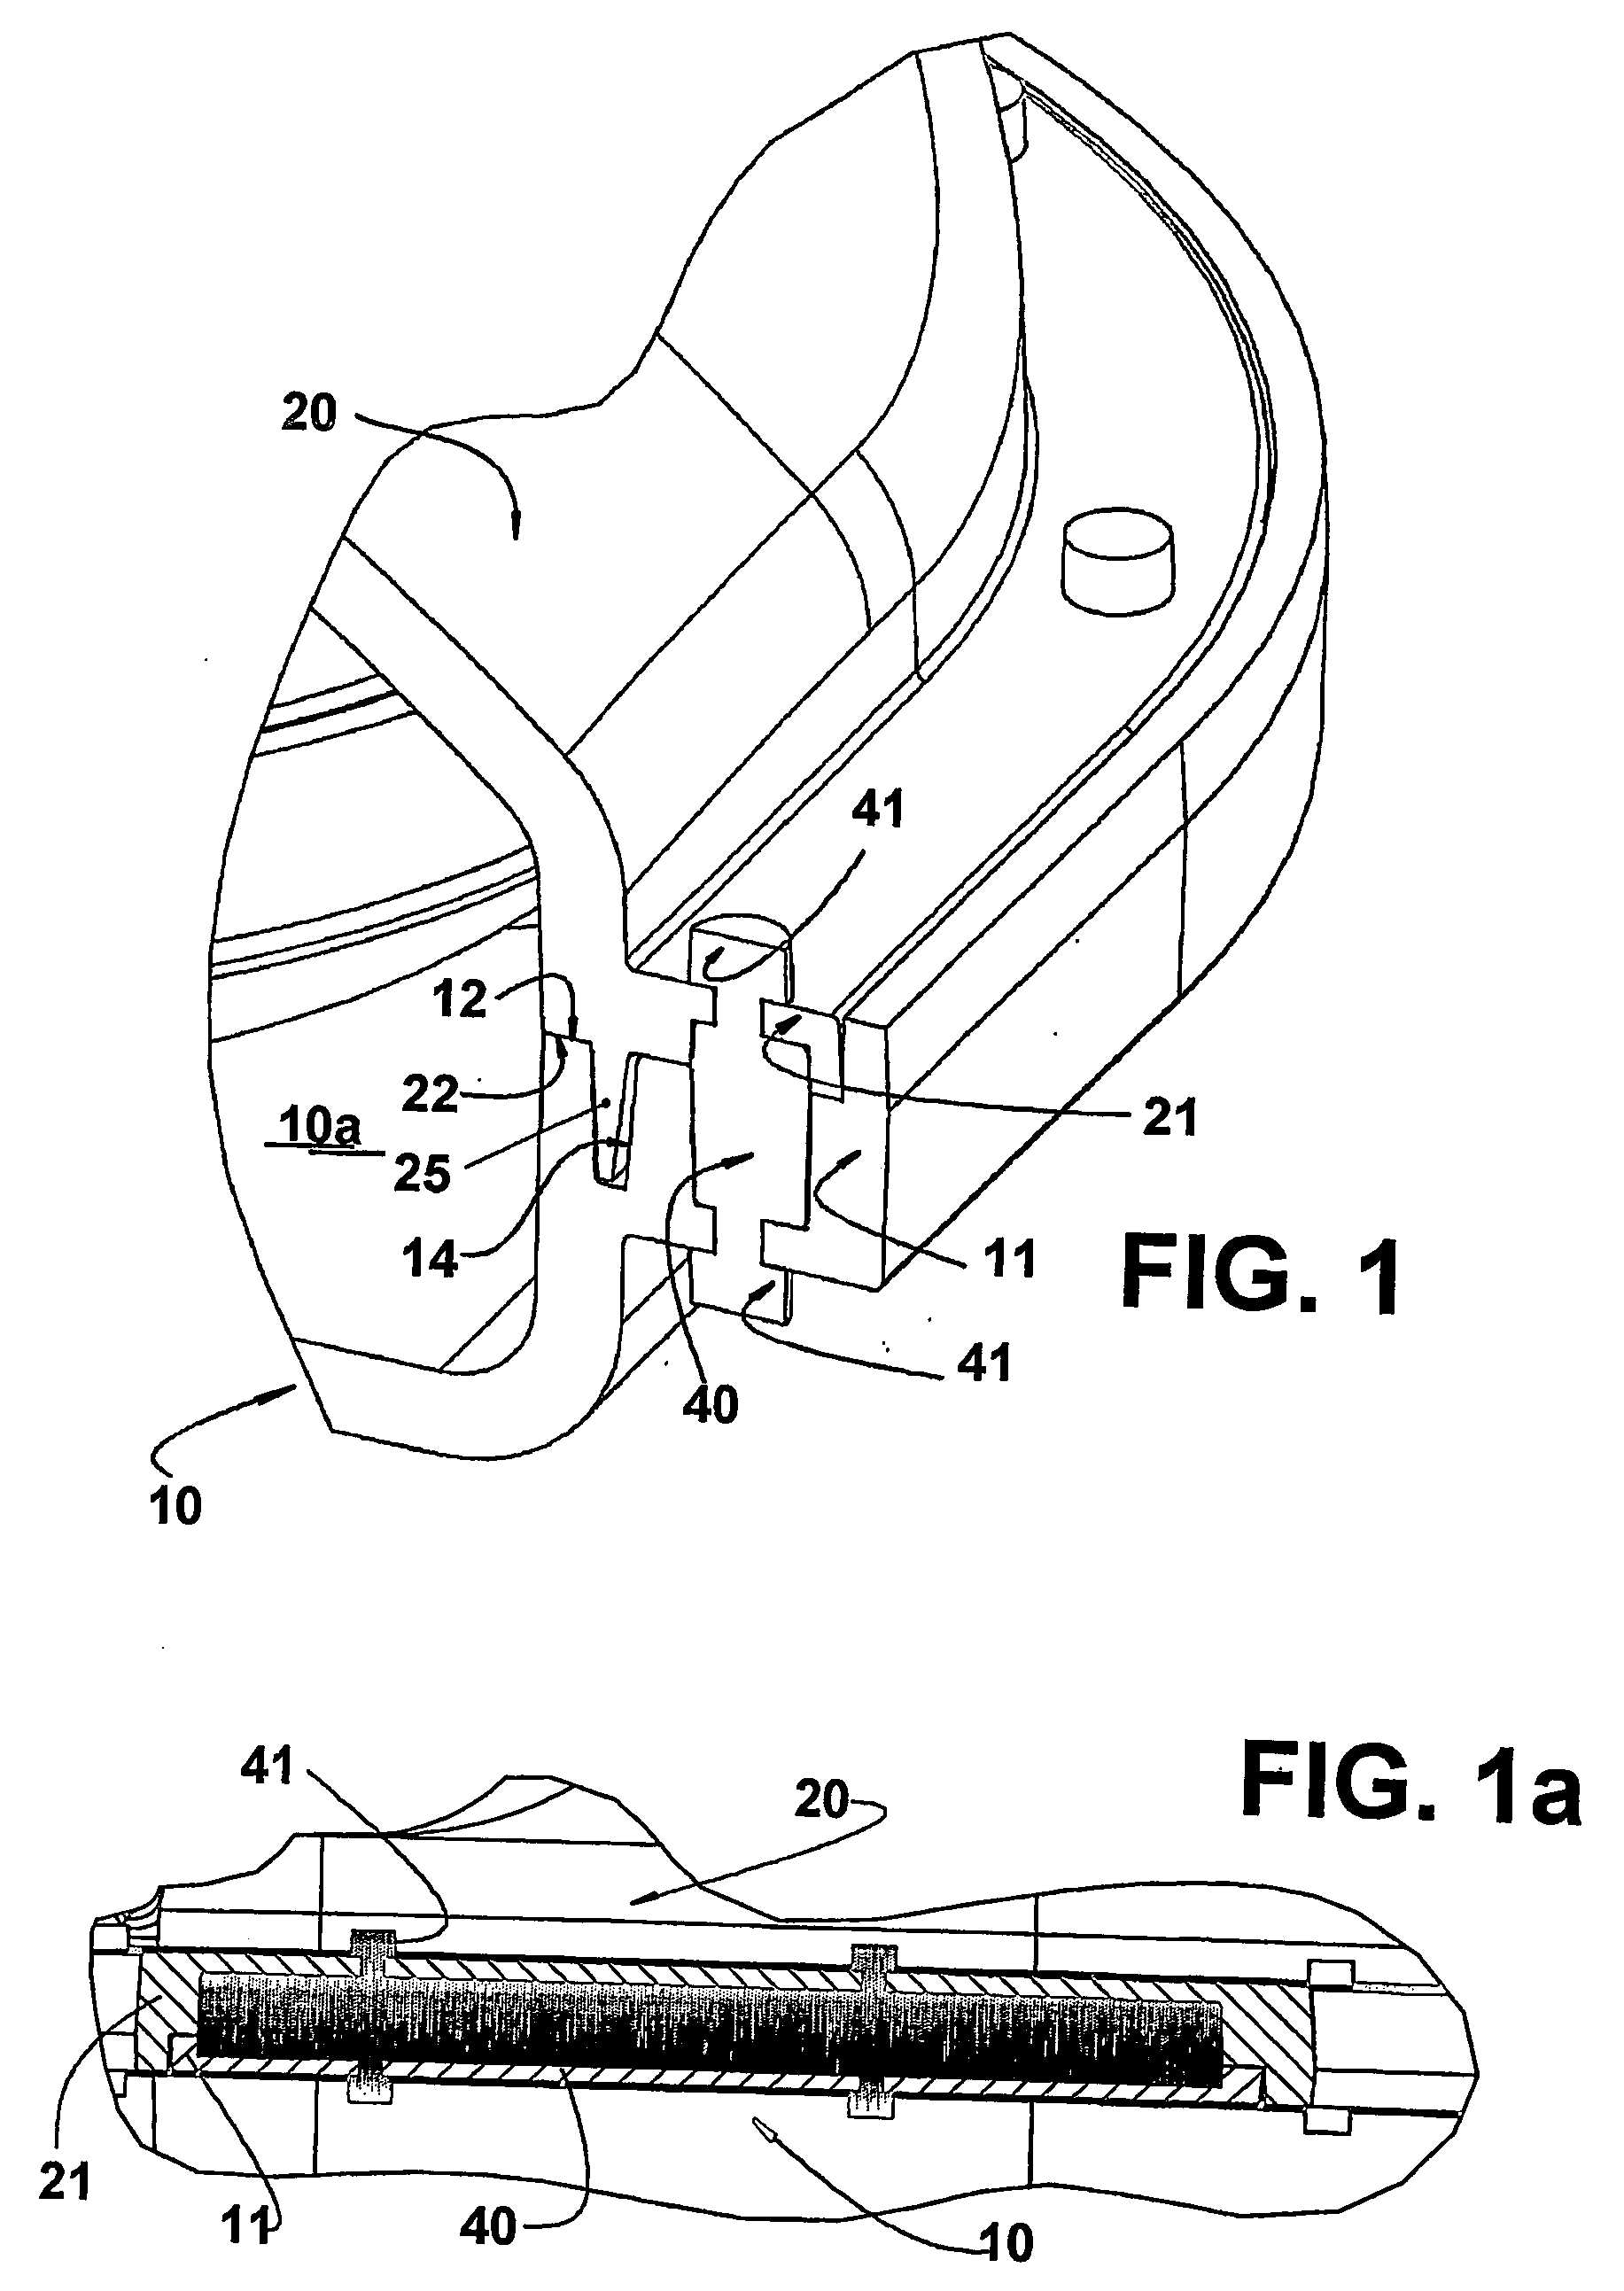 Suction muffler for a hermetic compressor